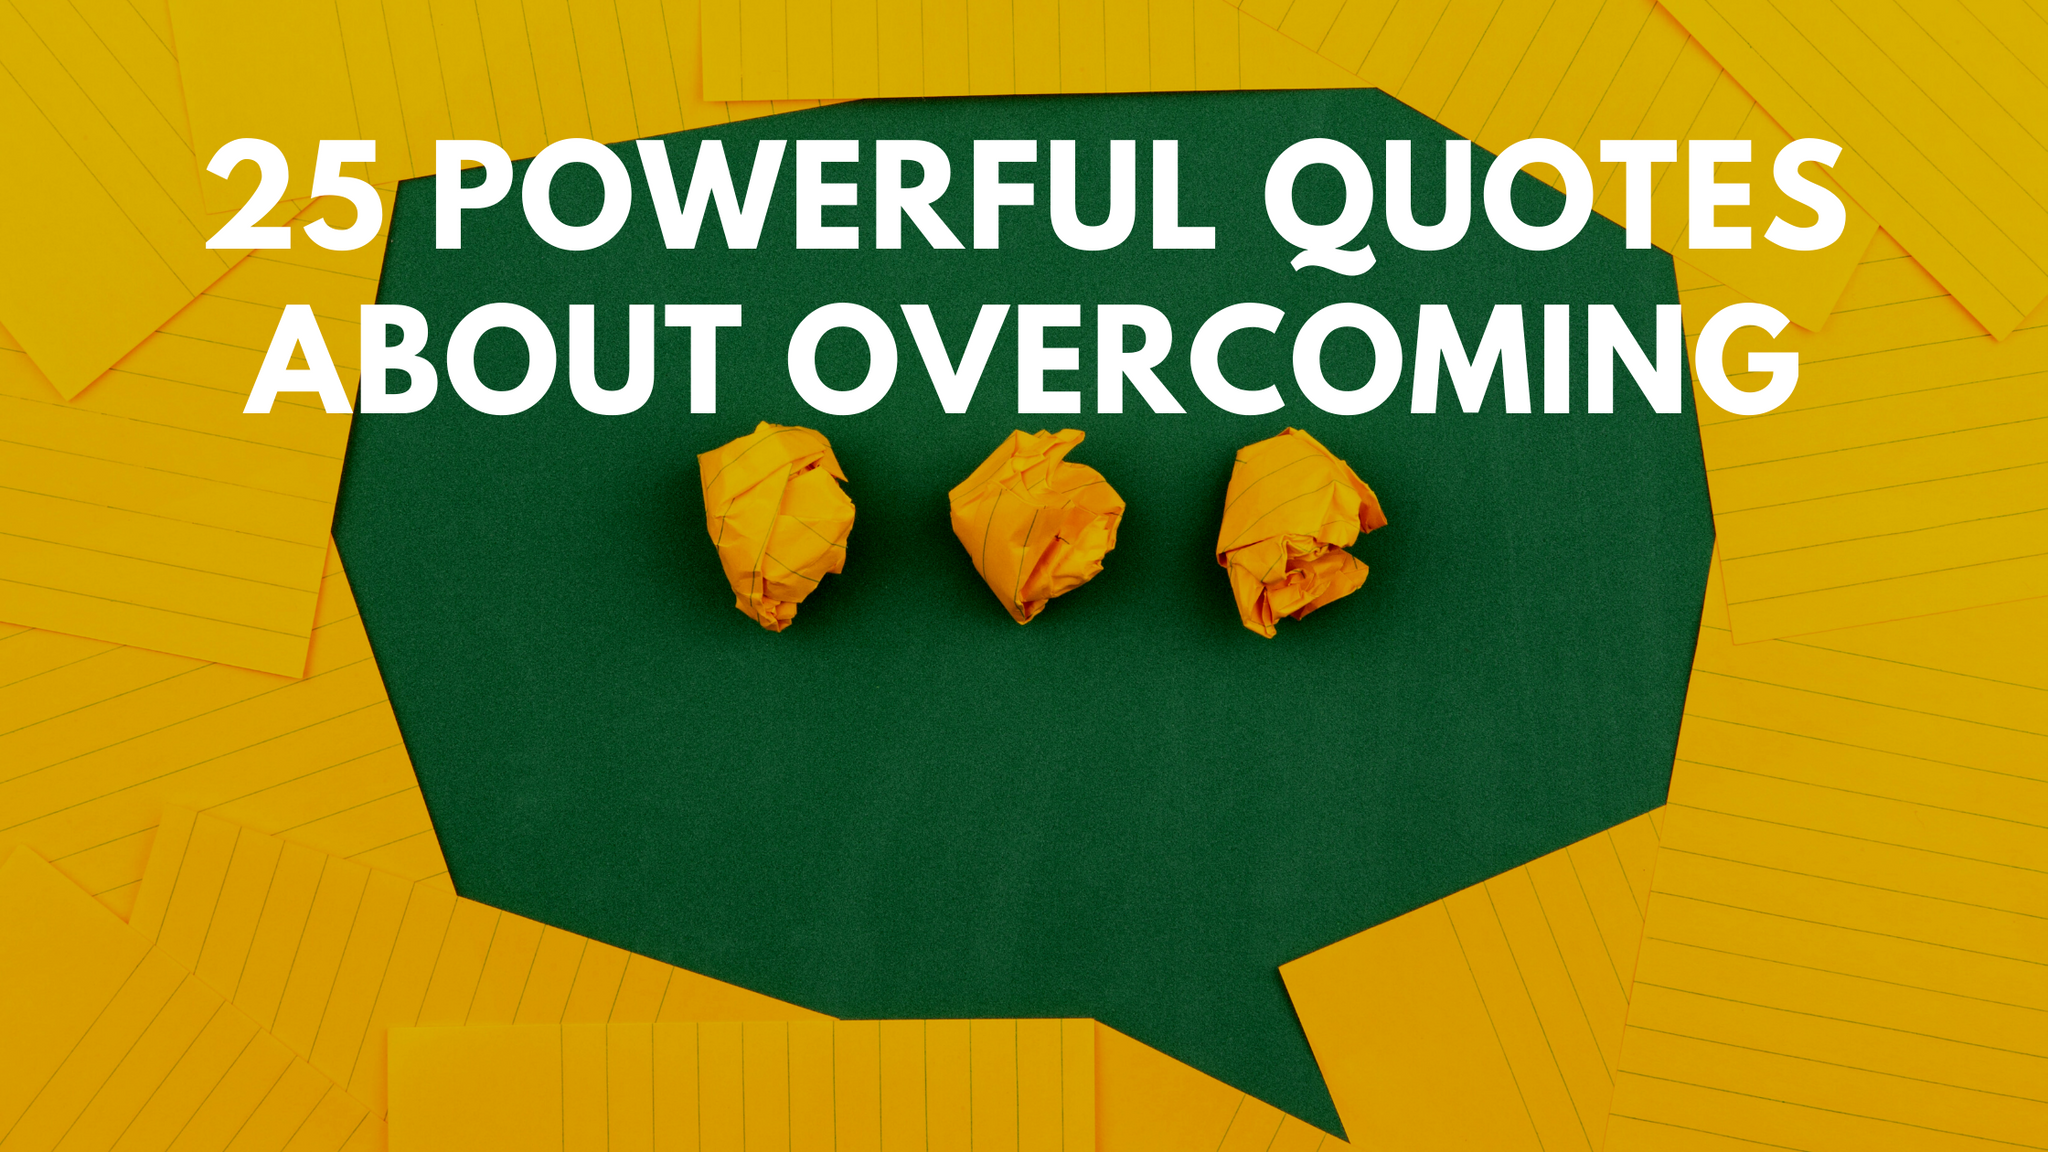 25 Powerful Quotes About Overcoming Adversity